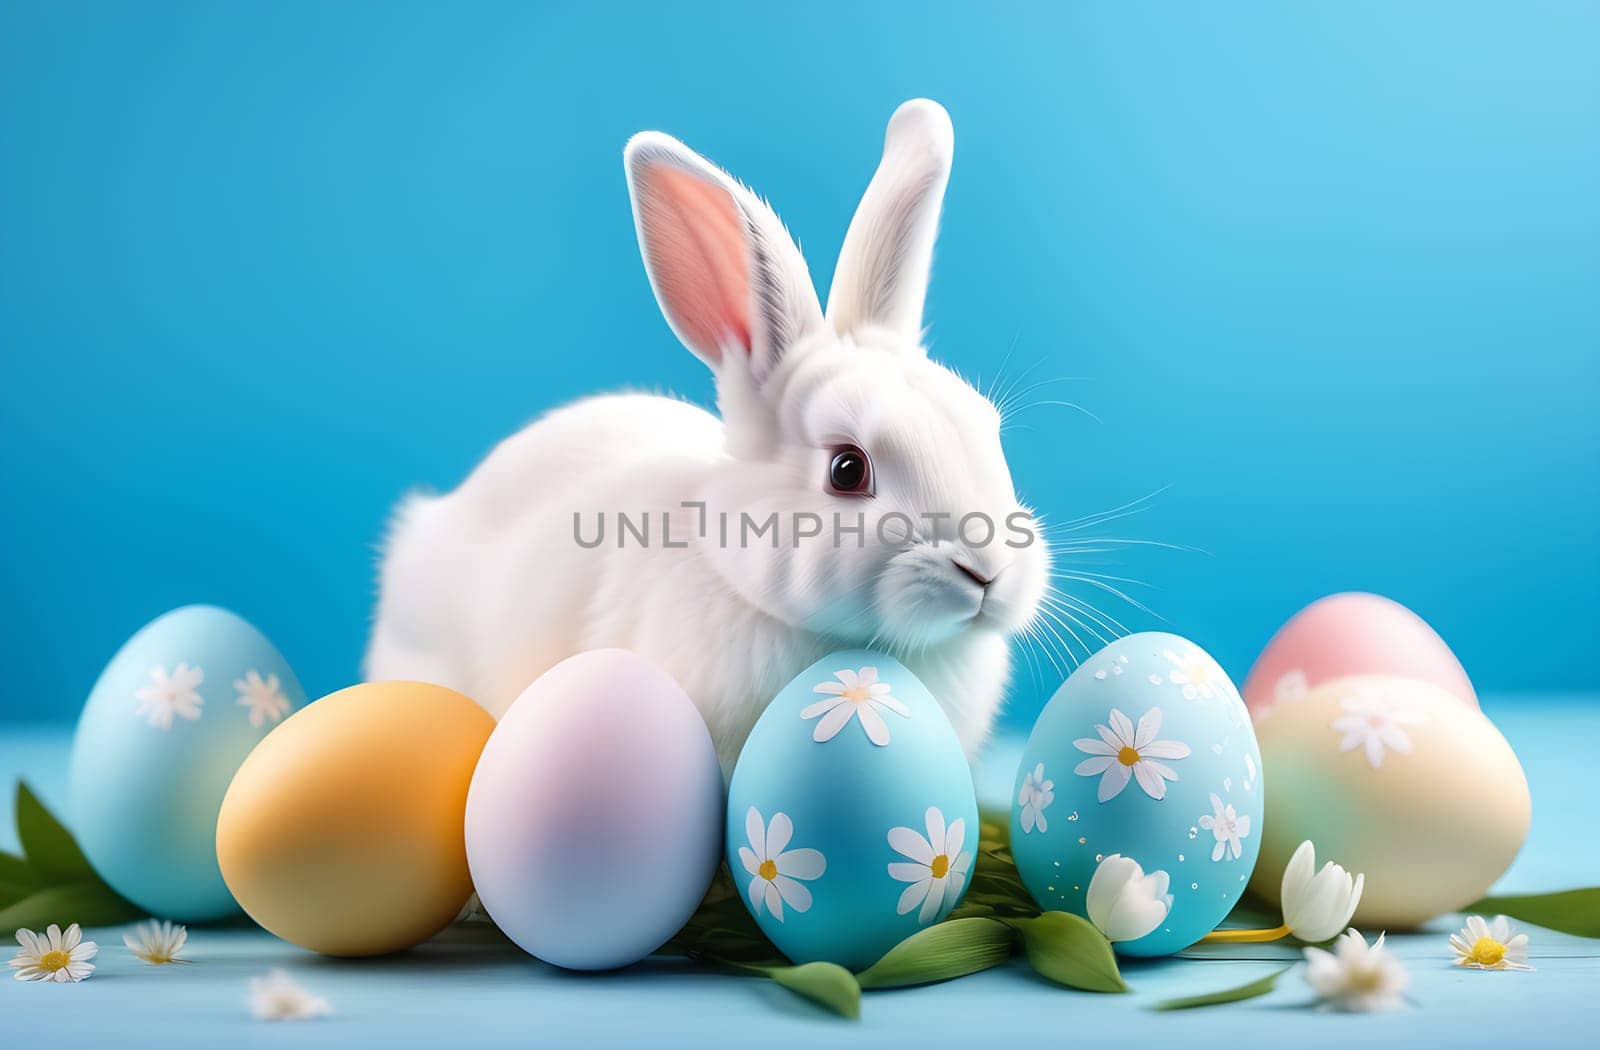 A small white fluffy rabbit sits near colorful Easter eggs and flowers on a blue background by claire_lucia